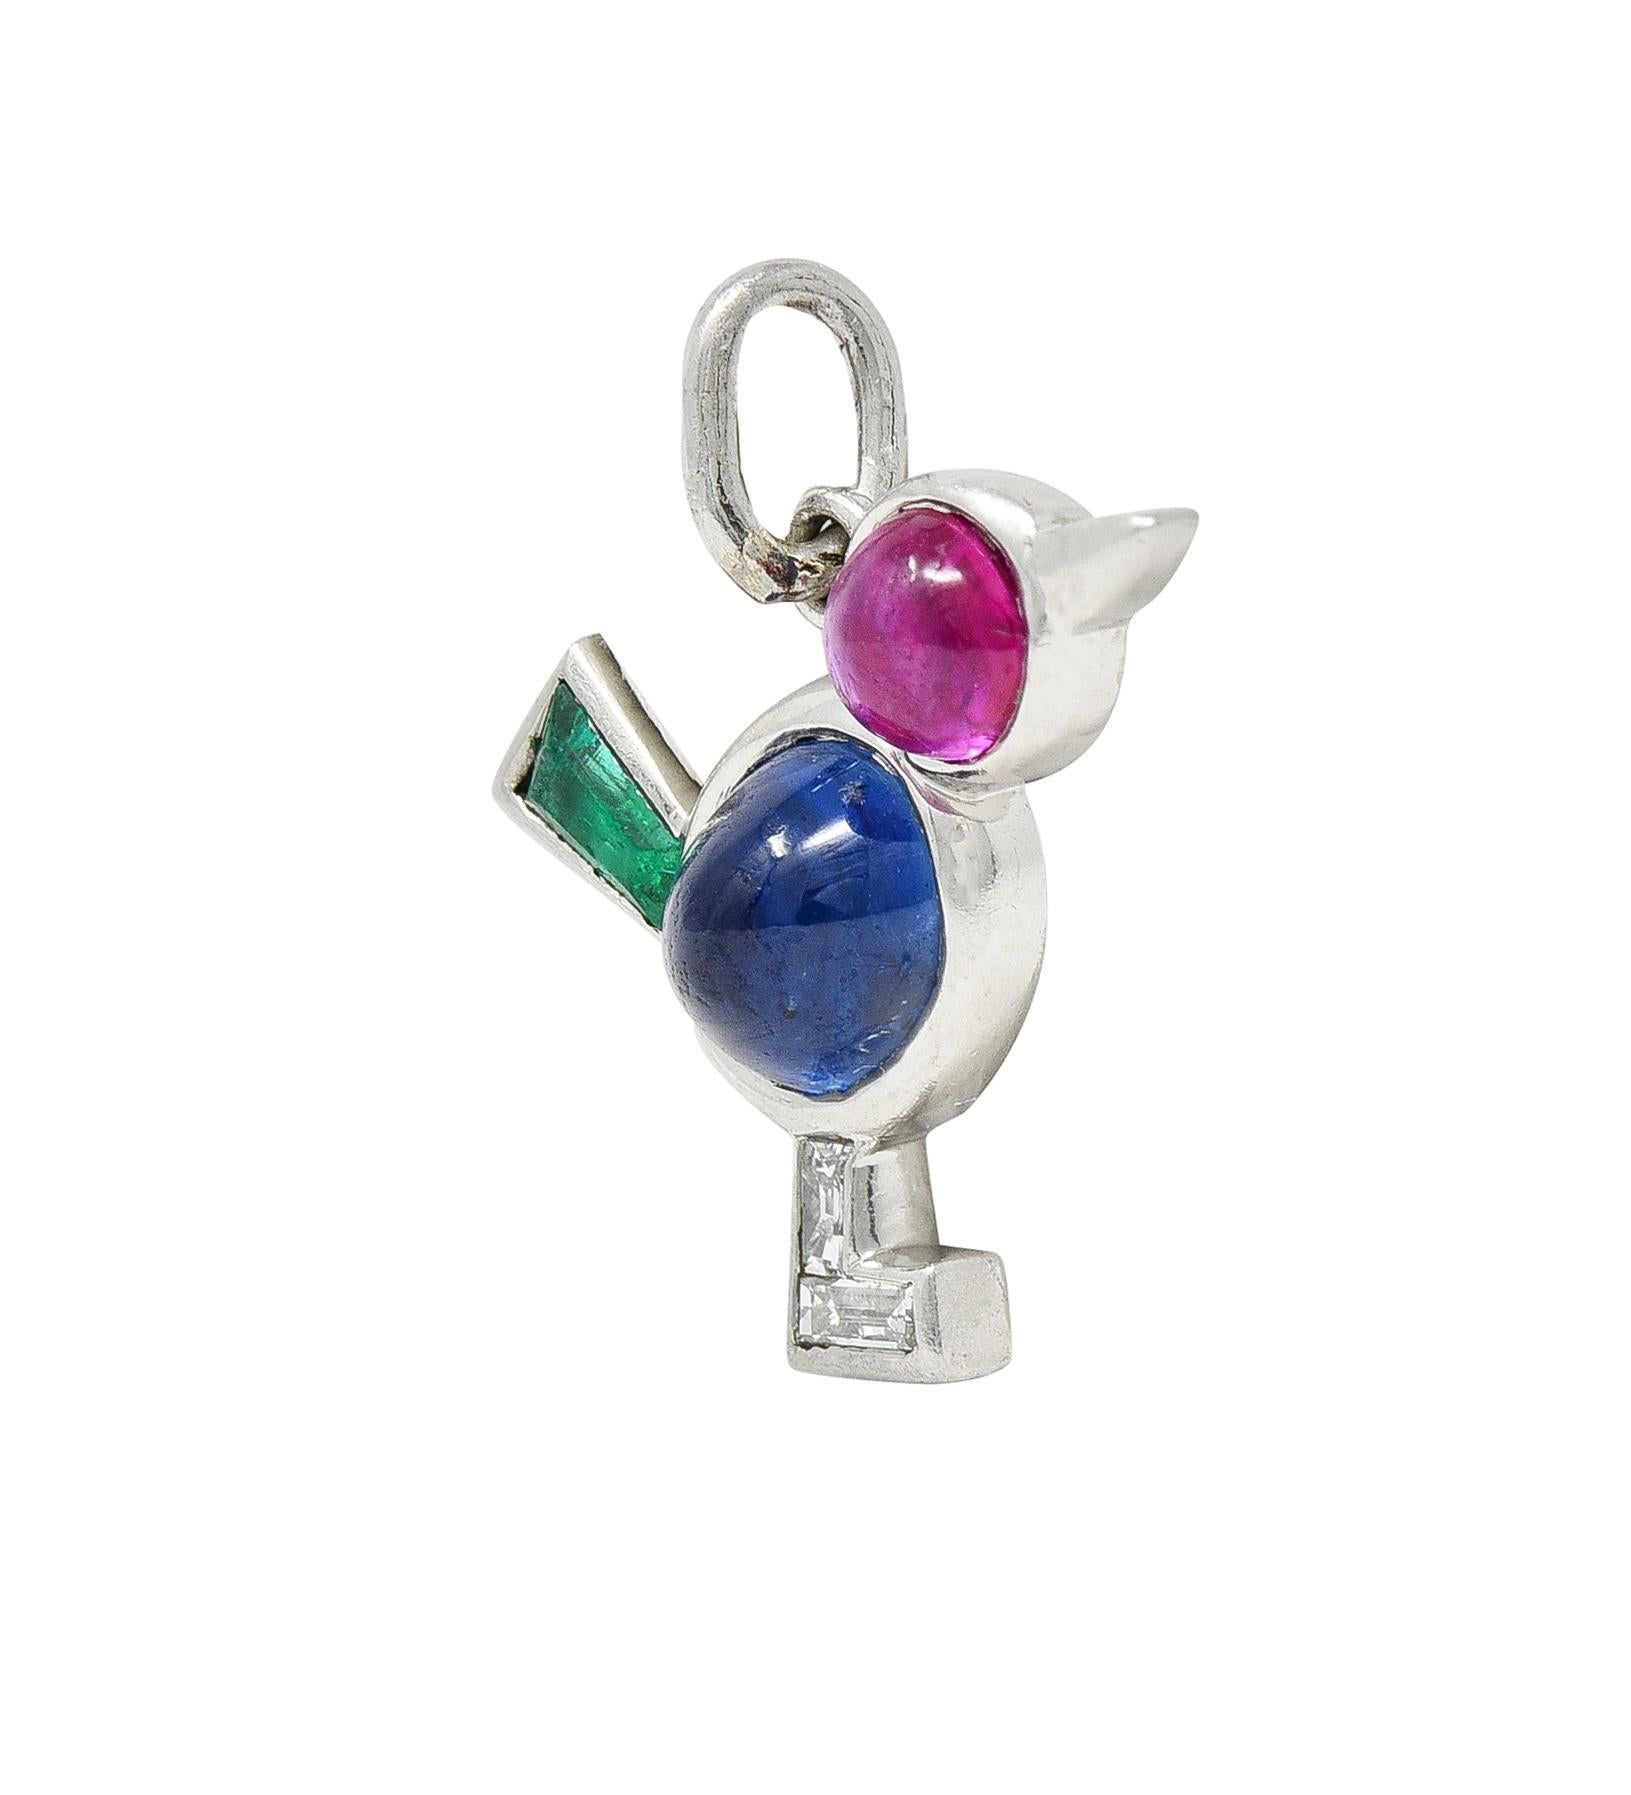 Designed as a stylized bird comprised of bezel set gemstone features
Centering an oval-shaped sapphire cabochon body 
Weighing approximately 0.86 carat - transparent medium blue
Accented by a round-shaped ruby cabochon head 
Weighing approximately